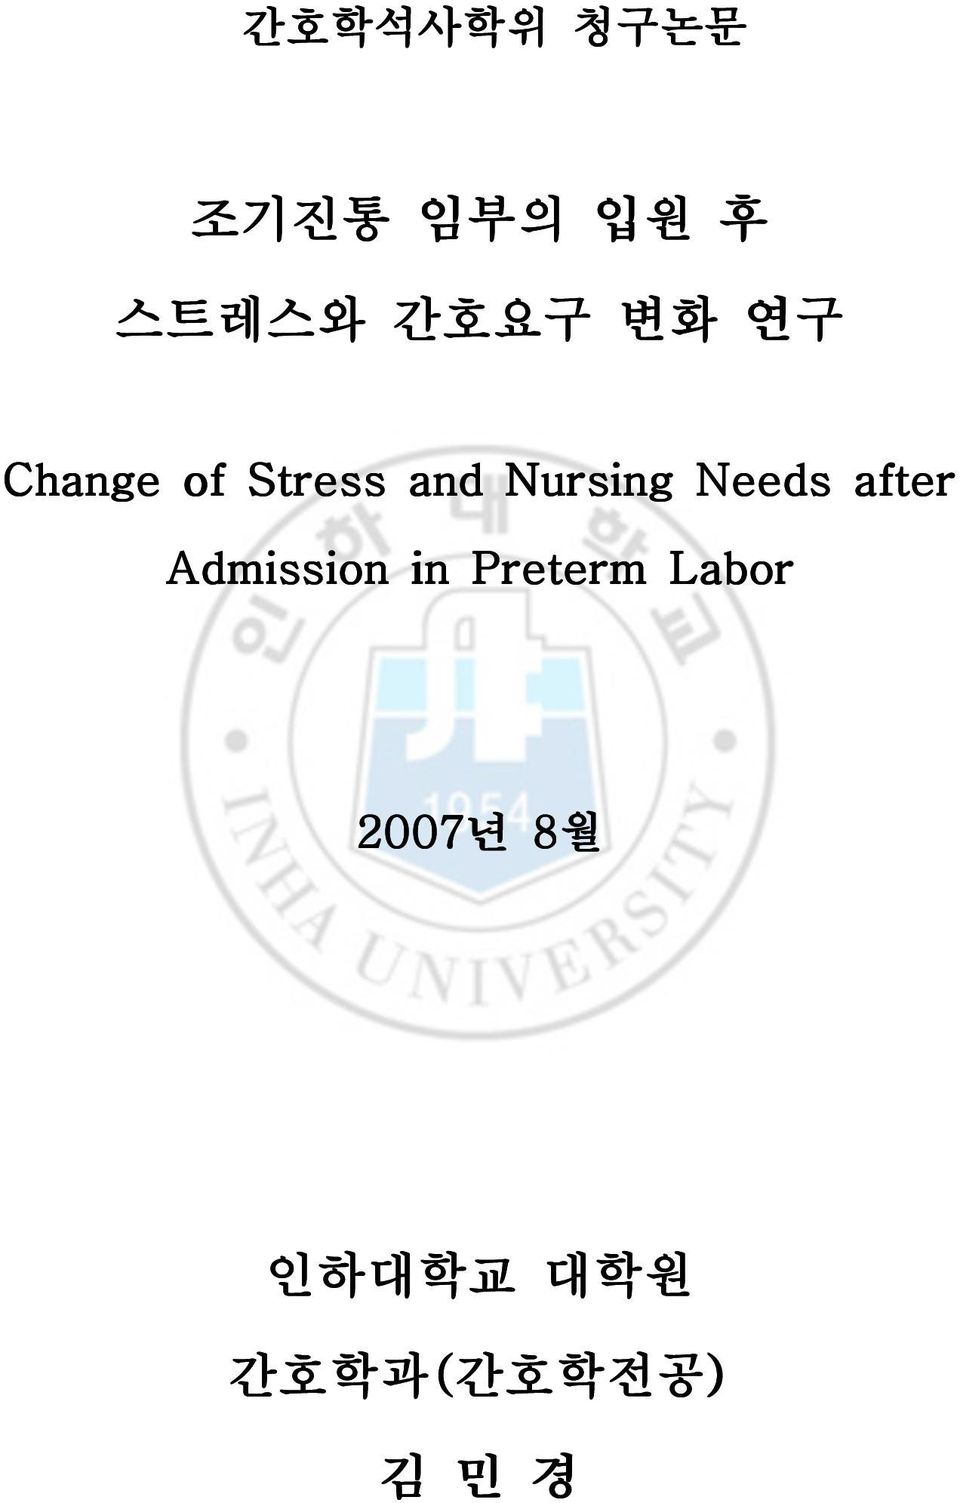 Needs after Admission in Preterm Labor